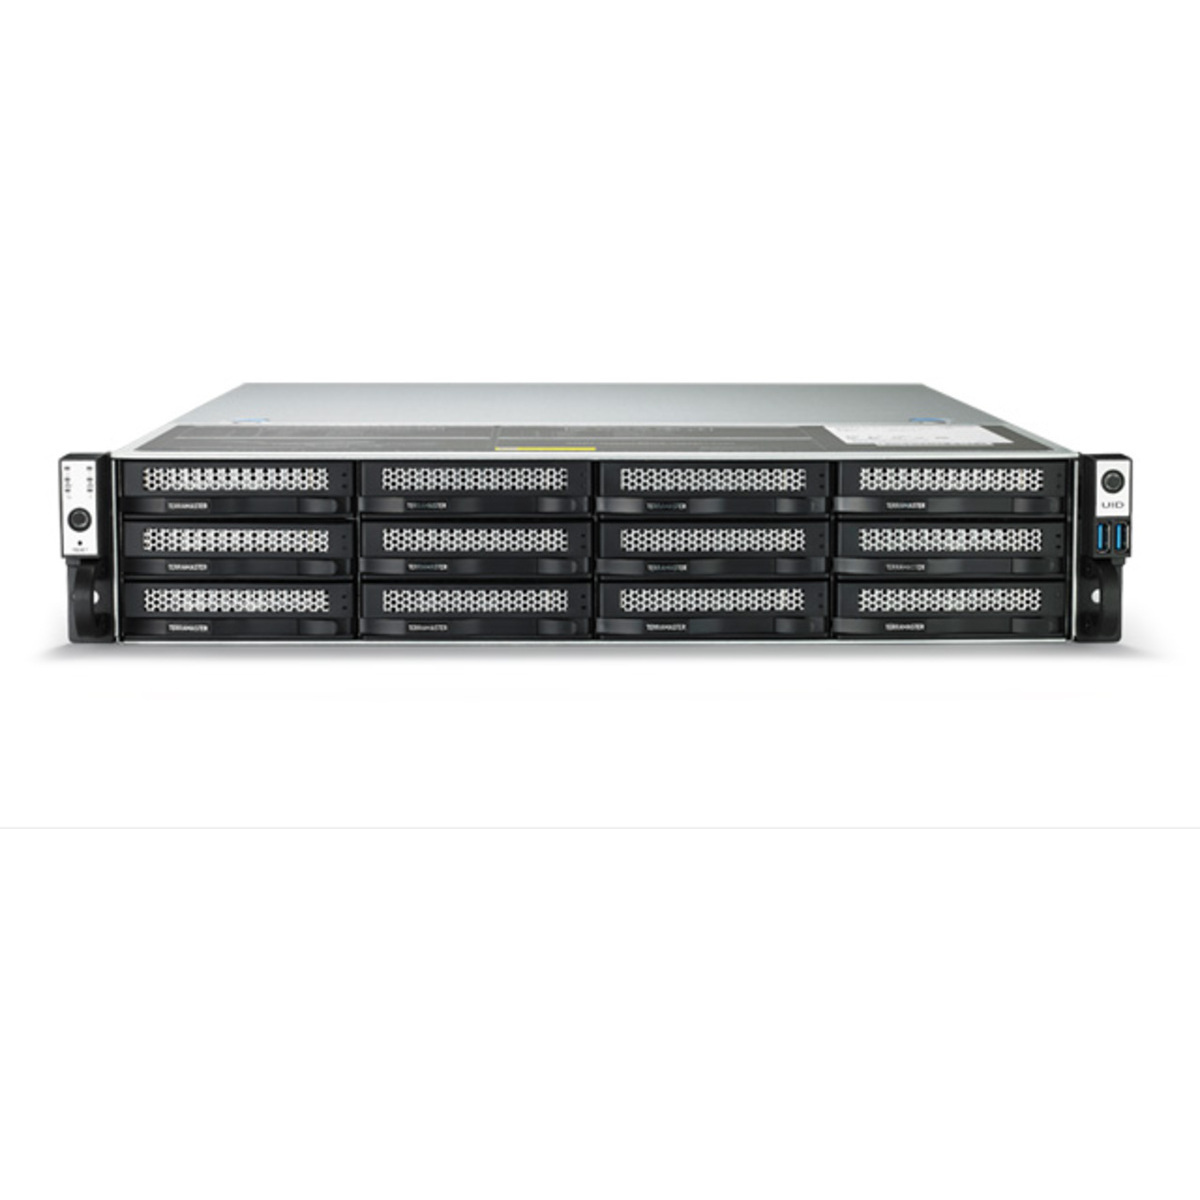 TerraMaster U12-722-2224 32tb 12-Bay RackMount Large Business / Enterprise NAS - Network Attached Storage Device 8x4tb Seagate EXOS 7E10 ST4000NM024B 3.5 7200rpm SATA 6Gb/s HDD ENTERPRISE Class Drives Installed - Burn-In Tested U12-722-2224